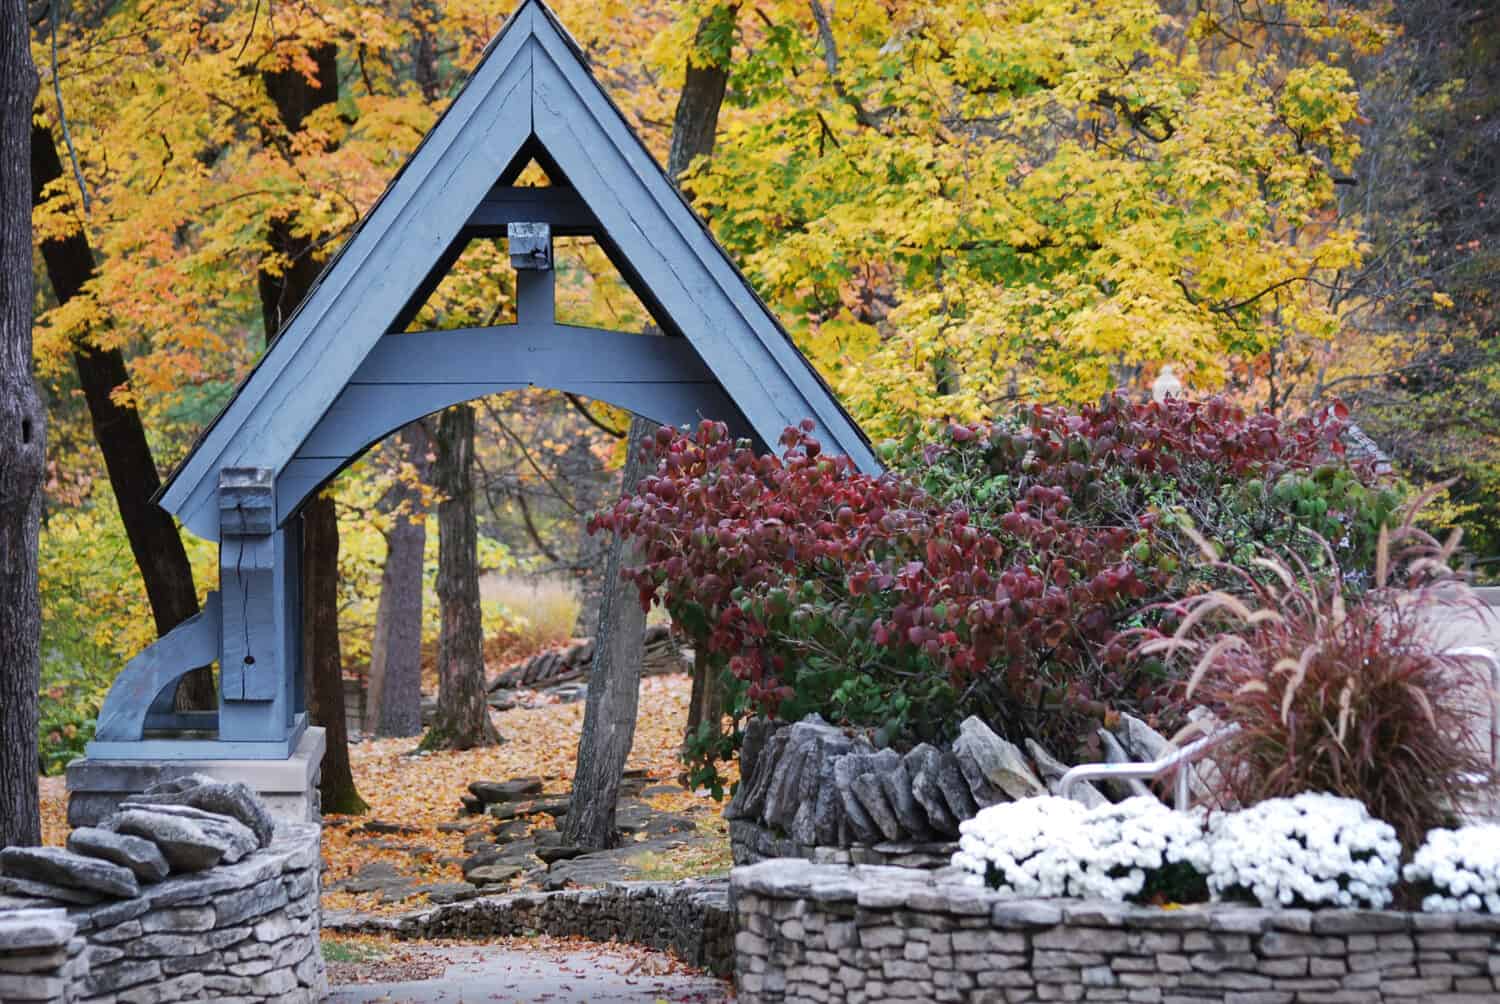 A quaint grey colored wooden archway surrounded by a stone wall at Indiana University in Bloomington, Indiana in the autumn.